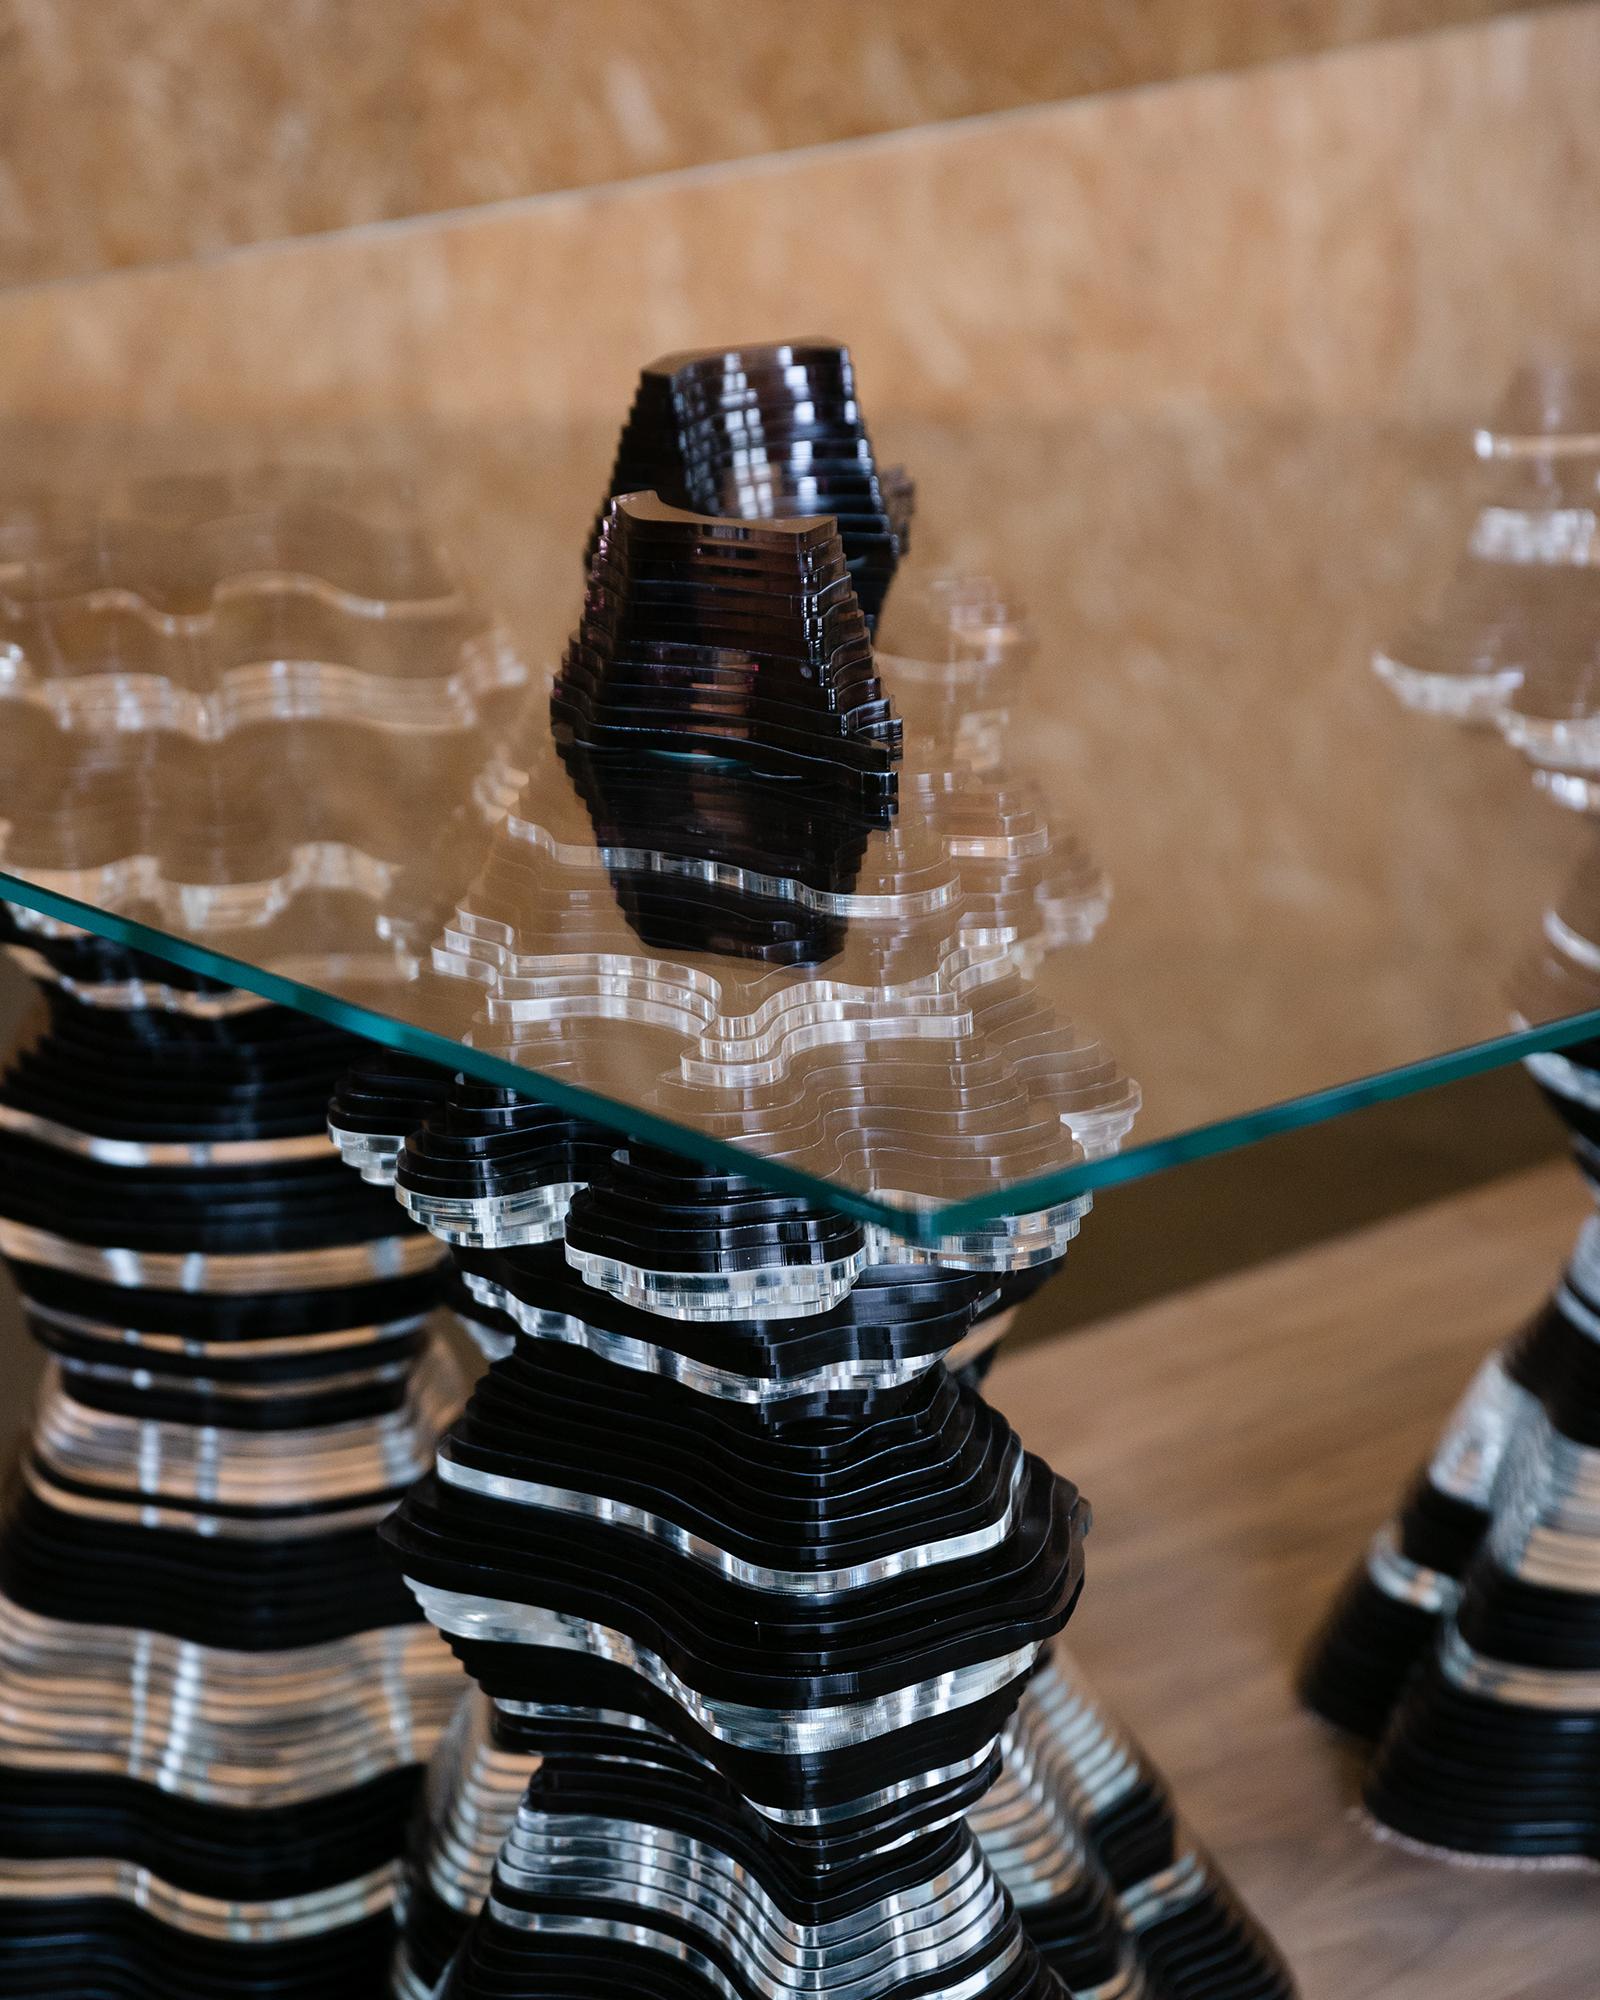 A new and impressive sculptural piece from Christopher Duffy, inspired by Nature, and with the forms of towering stalagmites breaking through the glass.

Finished with toughened glass and set to 75cm, the Stalagmite Table works as much as piece of